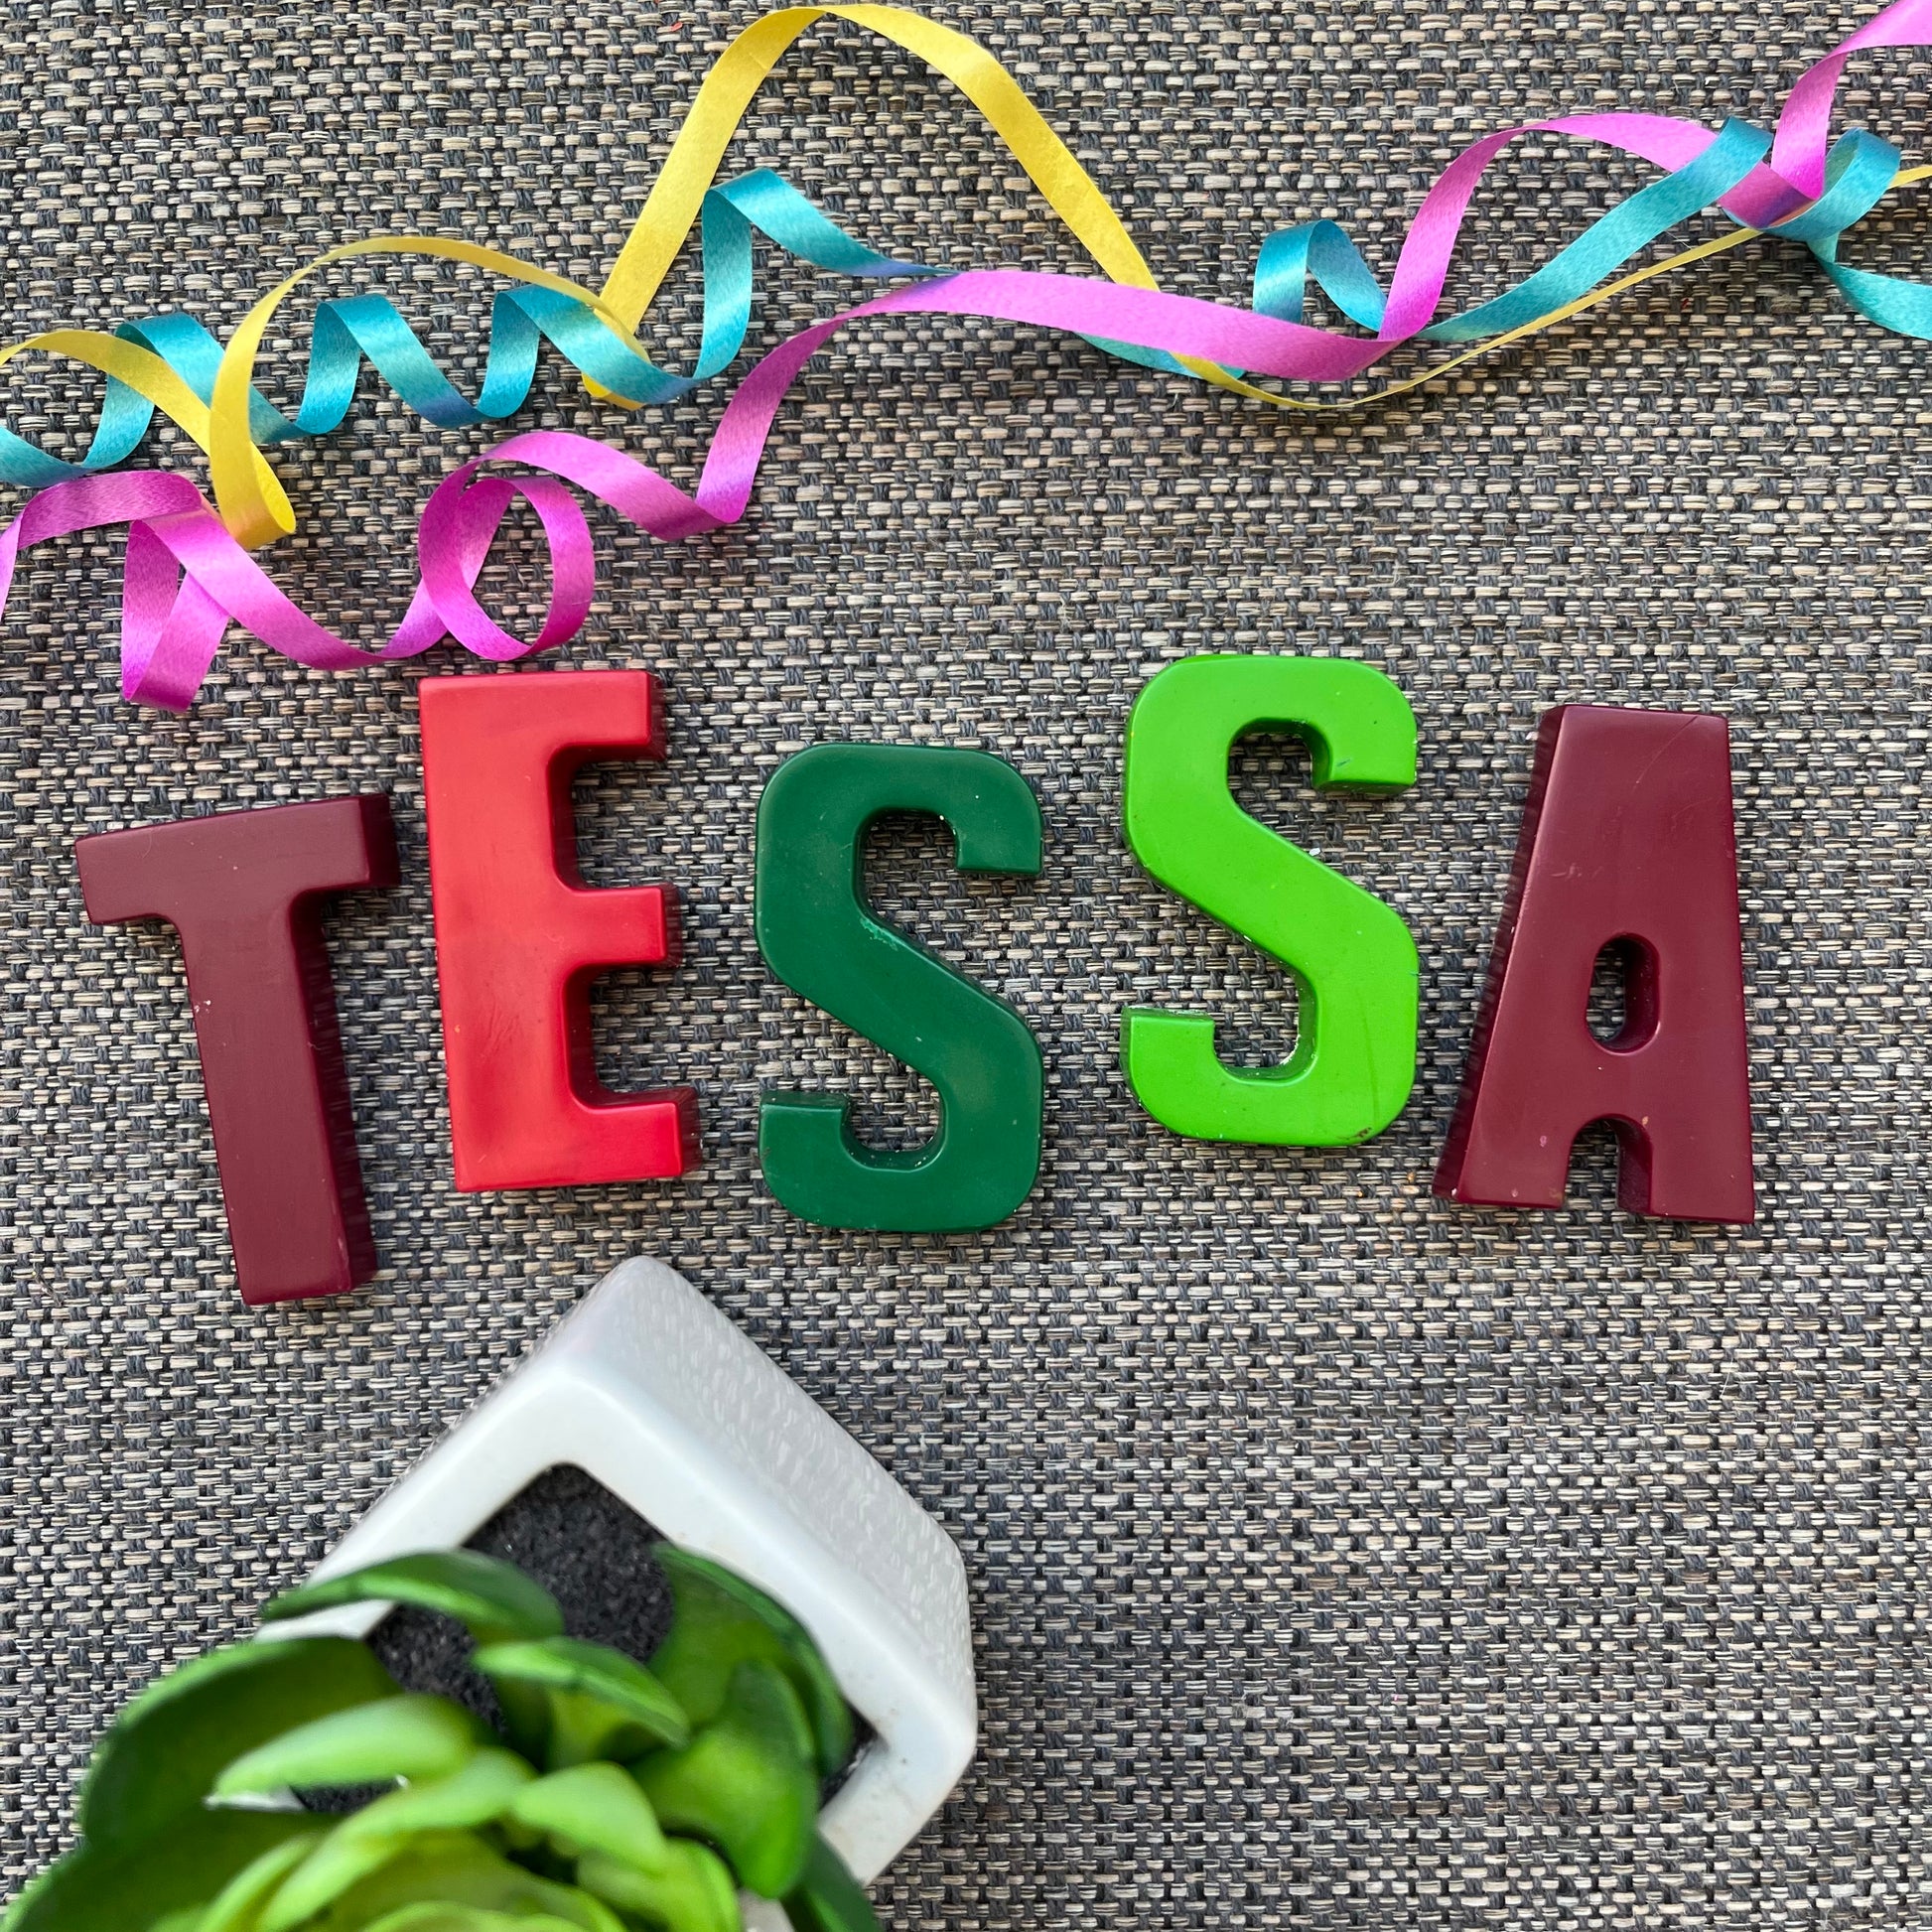 name TESSA is crayons. T is burgundy, E is red, S is dark green, S is light green and A is burgundy